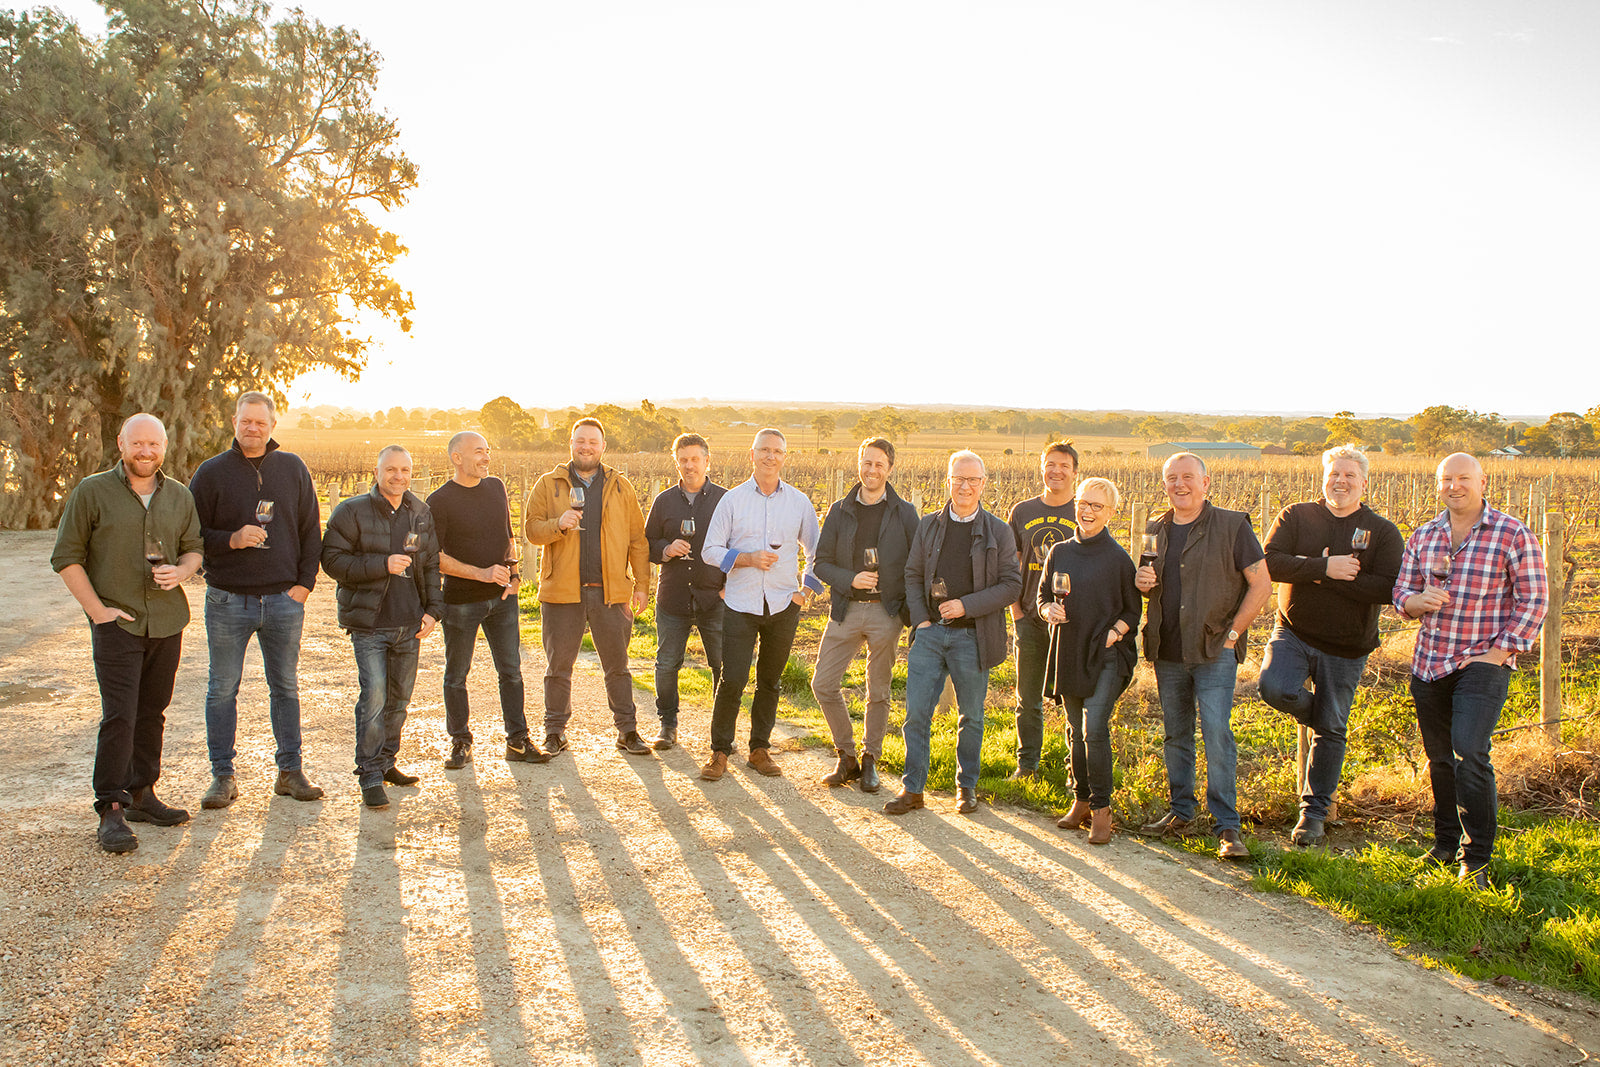 Group image of the Artisans of Barossa